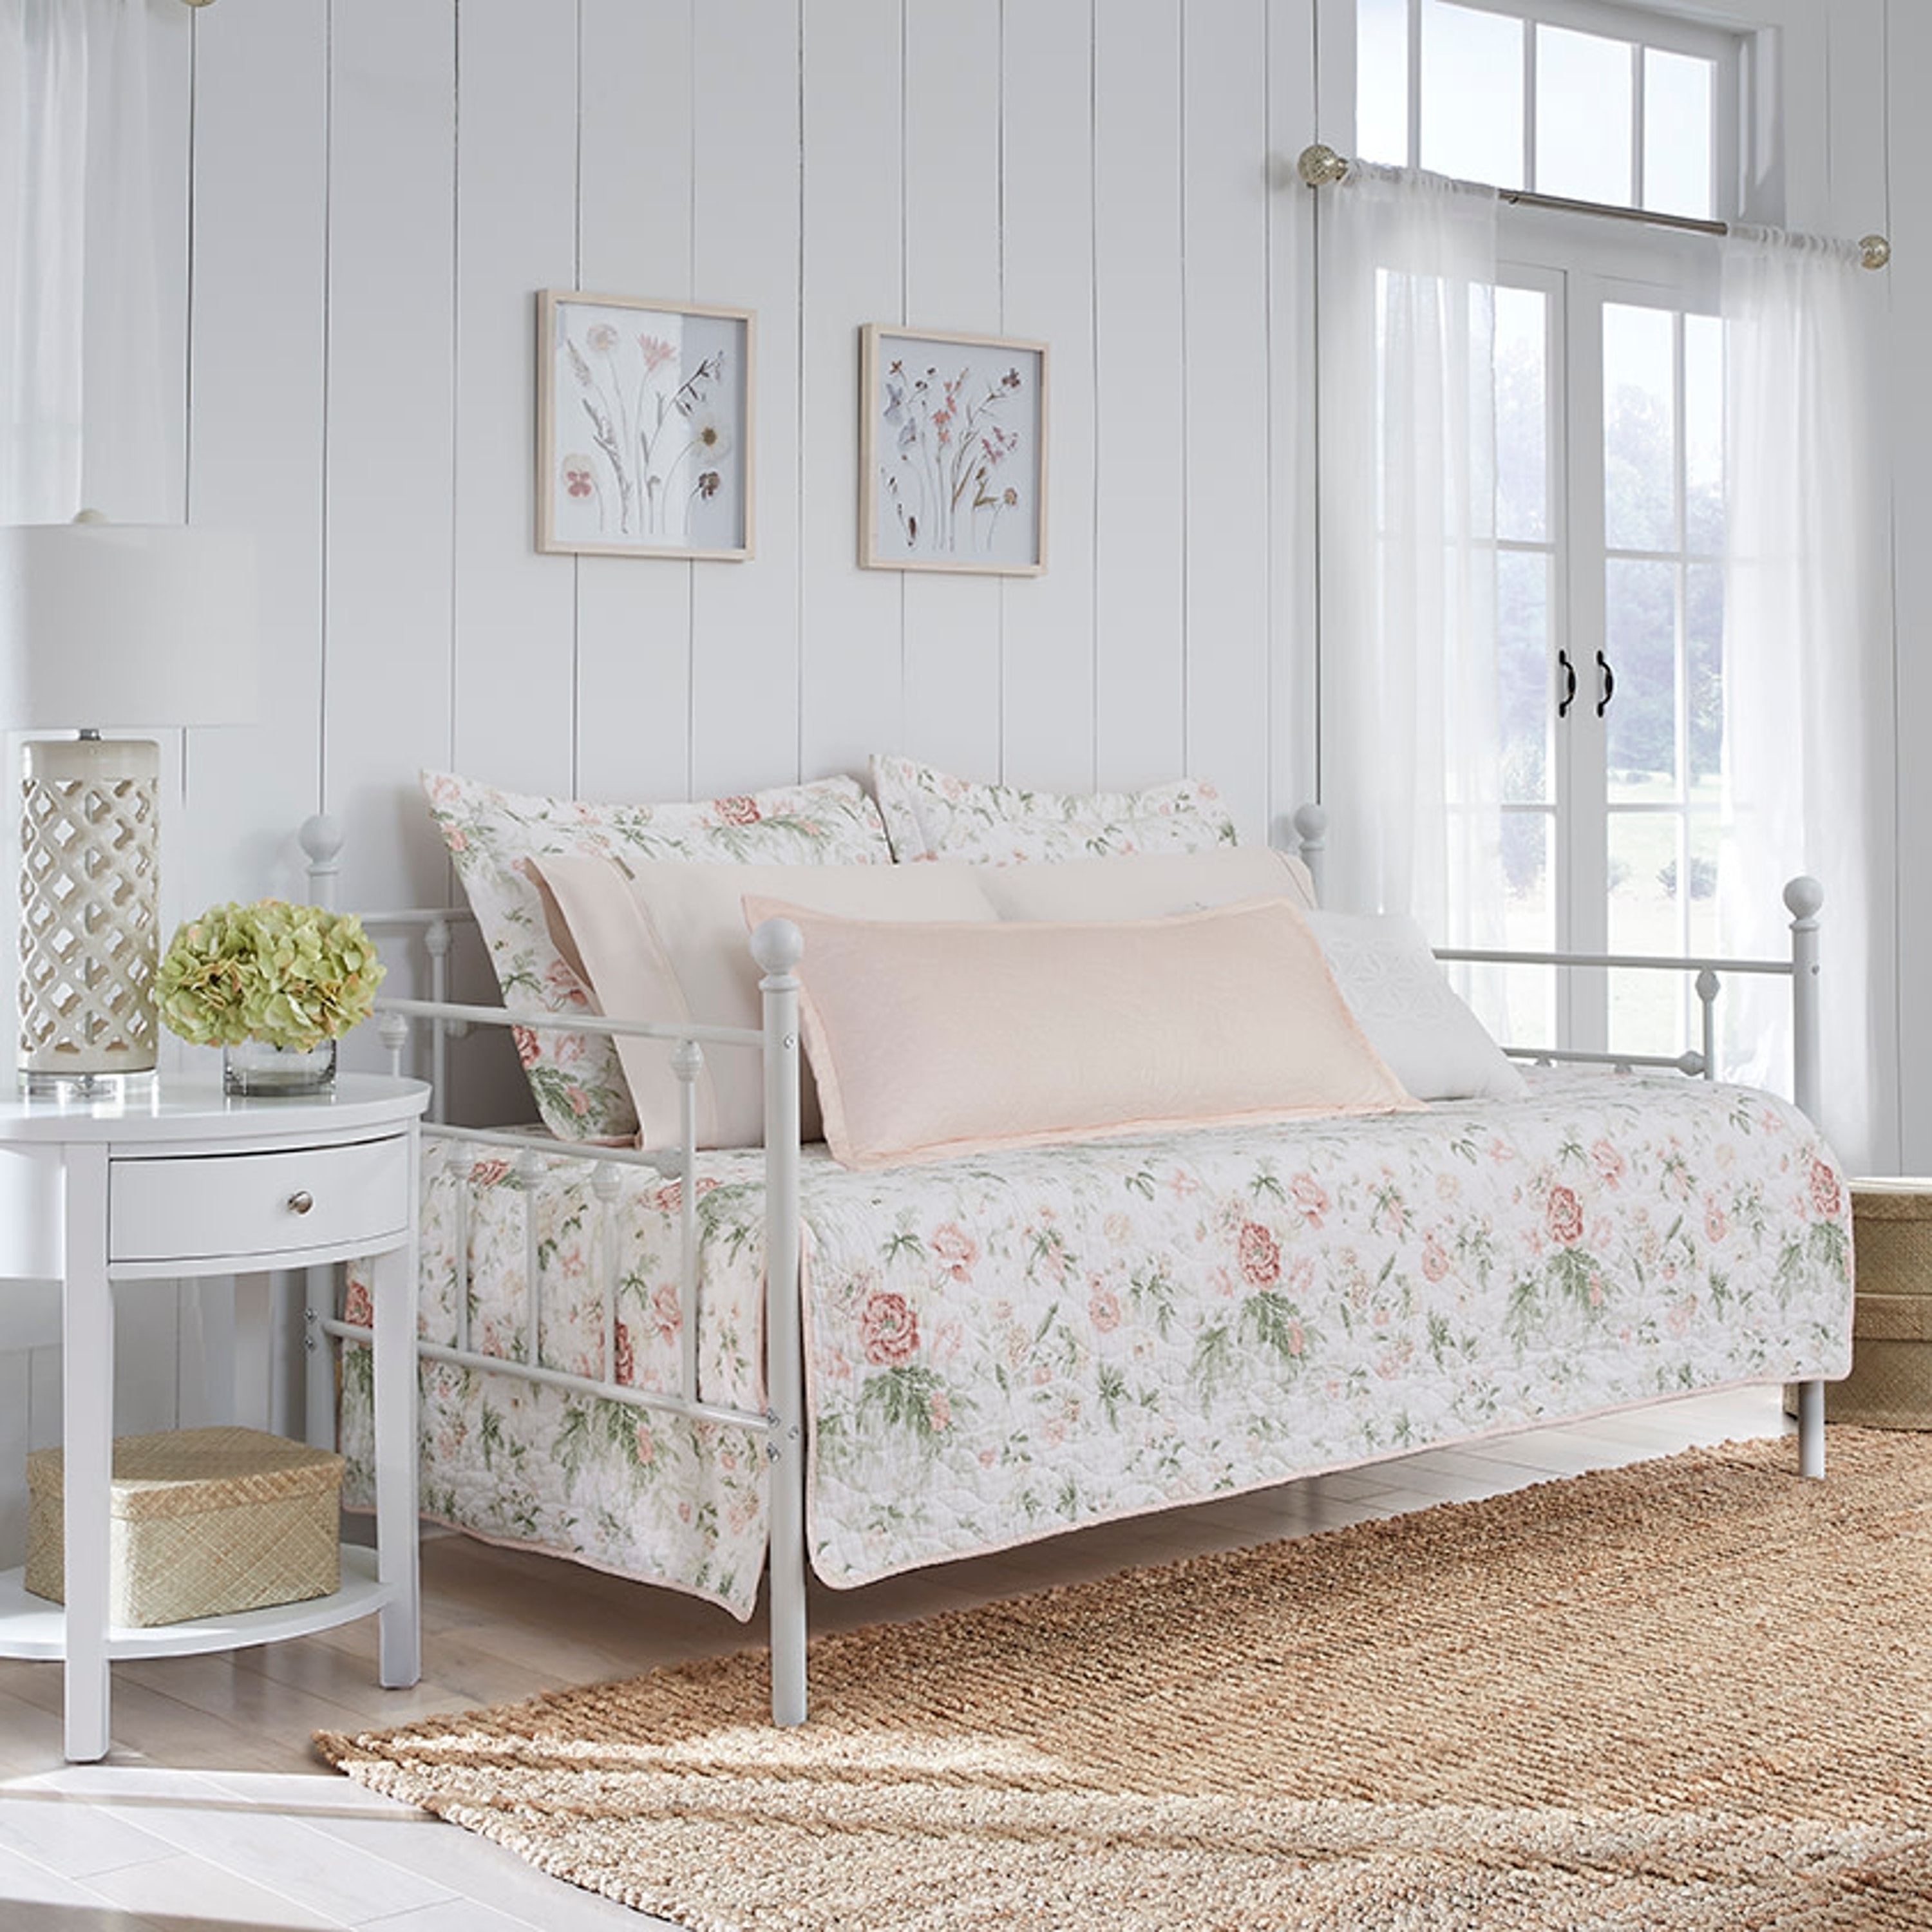 Lightweight Pre-Washed for Added Softness All Season Bedding 100% Cotton Laura Ashley Home Trellis Collection 4pc Daybed Set USHSFK1180530 White 